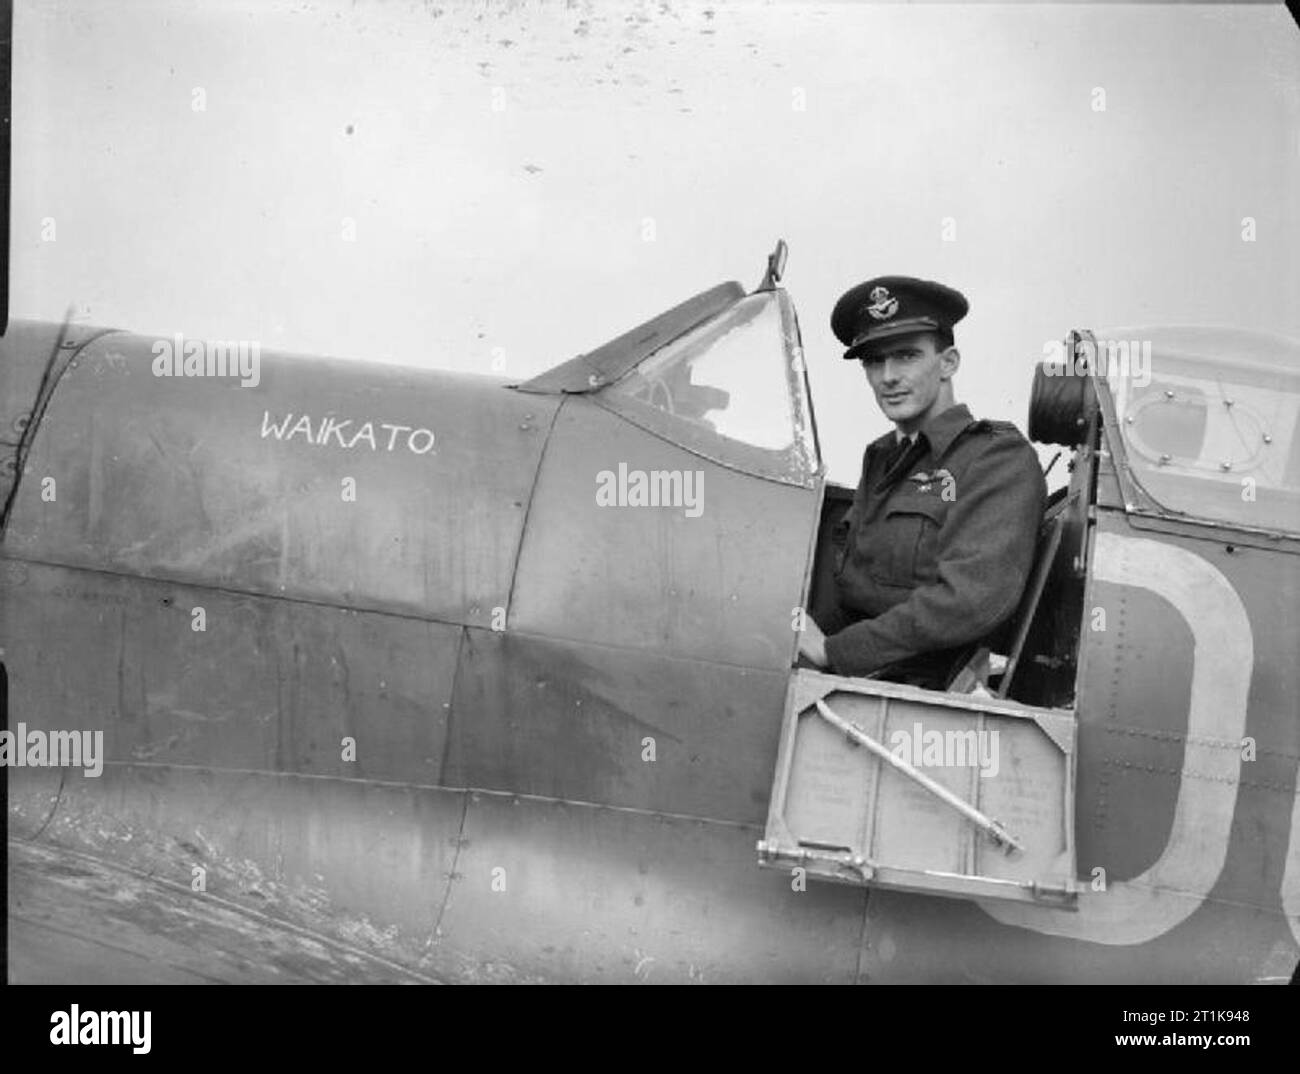 Royal Air Force Fighter Command, 1939-1945. Flight-Lieutenant E P 'Hawkeye'Wells of No 485 (New Zealand) Squadron RAF, sitting in the cockpit of his Supermarine Spitfire Mark VB, 'Waikato', at Kenley, Surrey. He assumed command of the Squadron in February 1942, and later led the Kenley, Tangmere, Detling and West Malling Wings before being appointed the commanding officer of the Fighter Leaders School at the Central Flying Establishment in 1944. He finished the war having shot down 13 enemy aircraft. Stock Photo